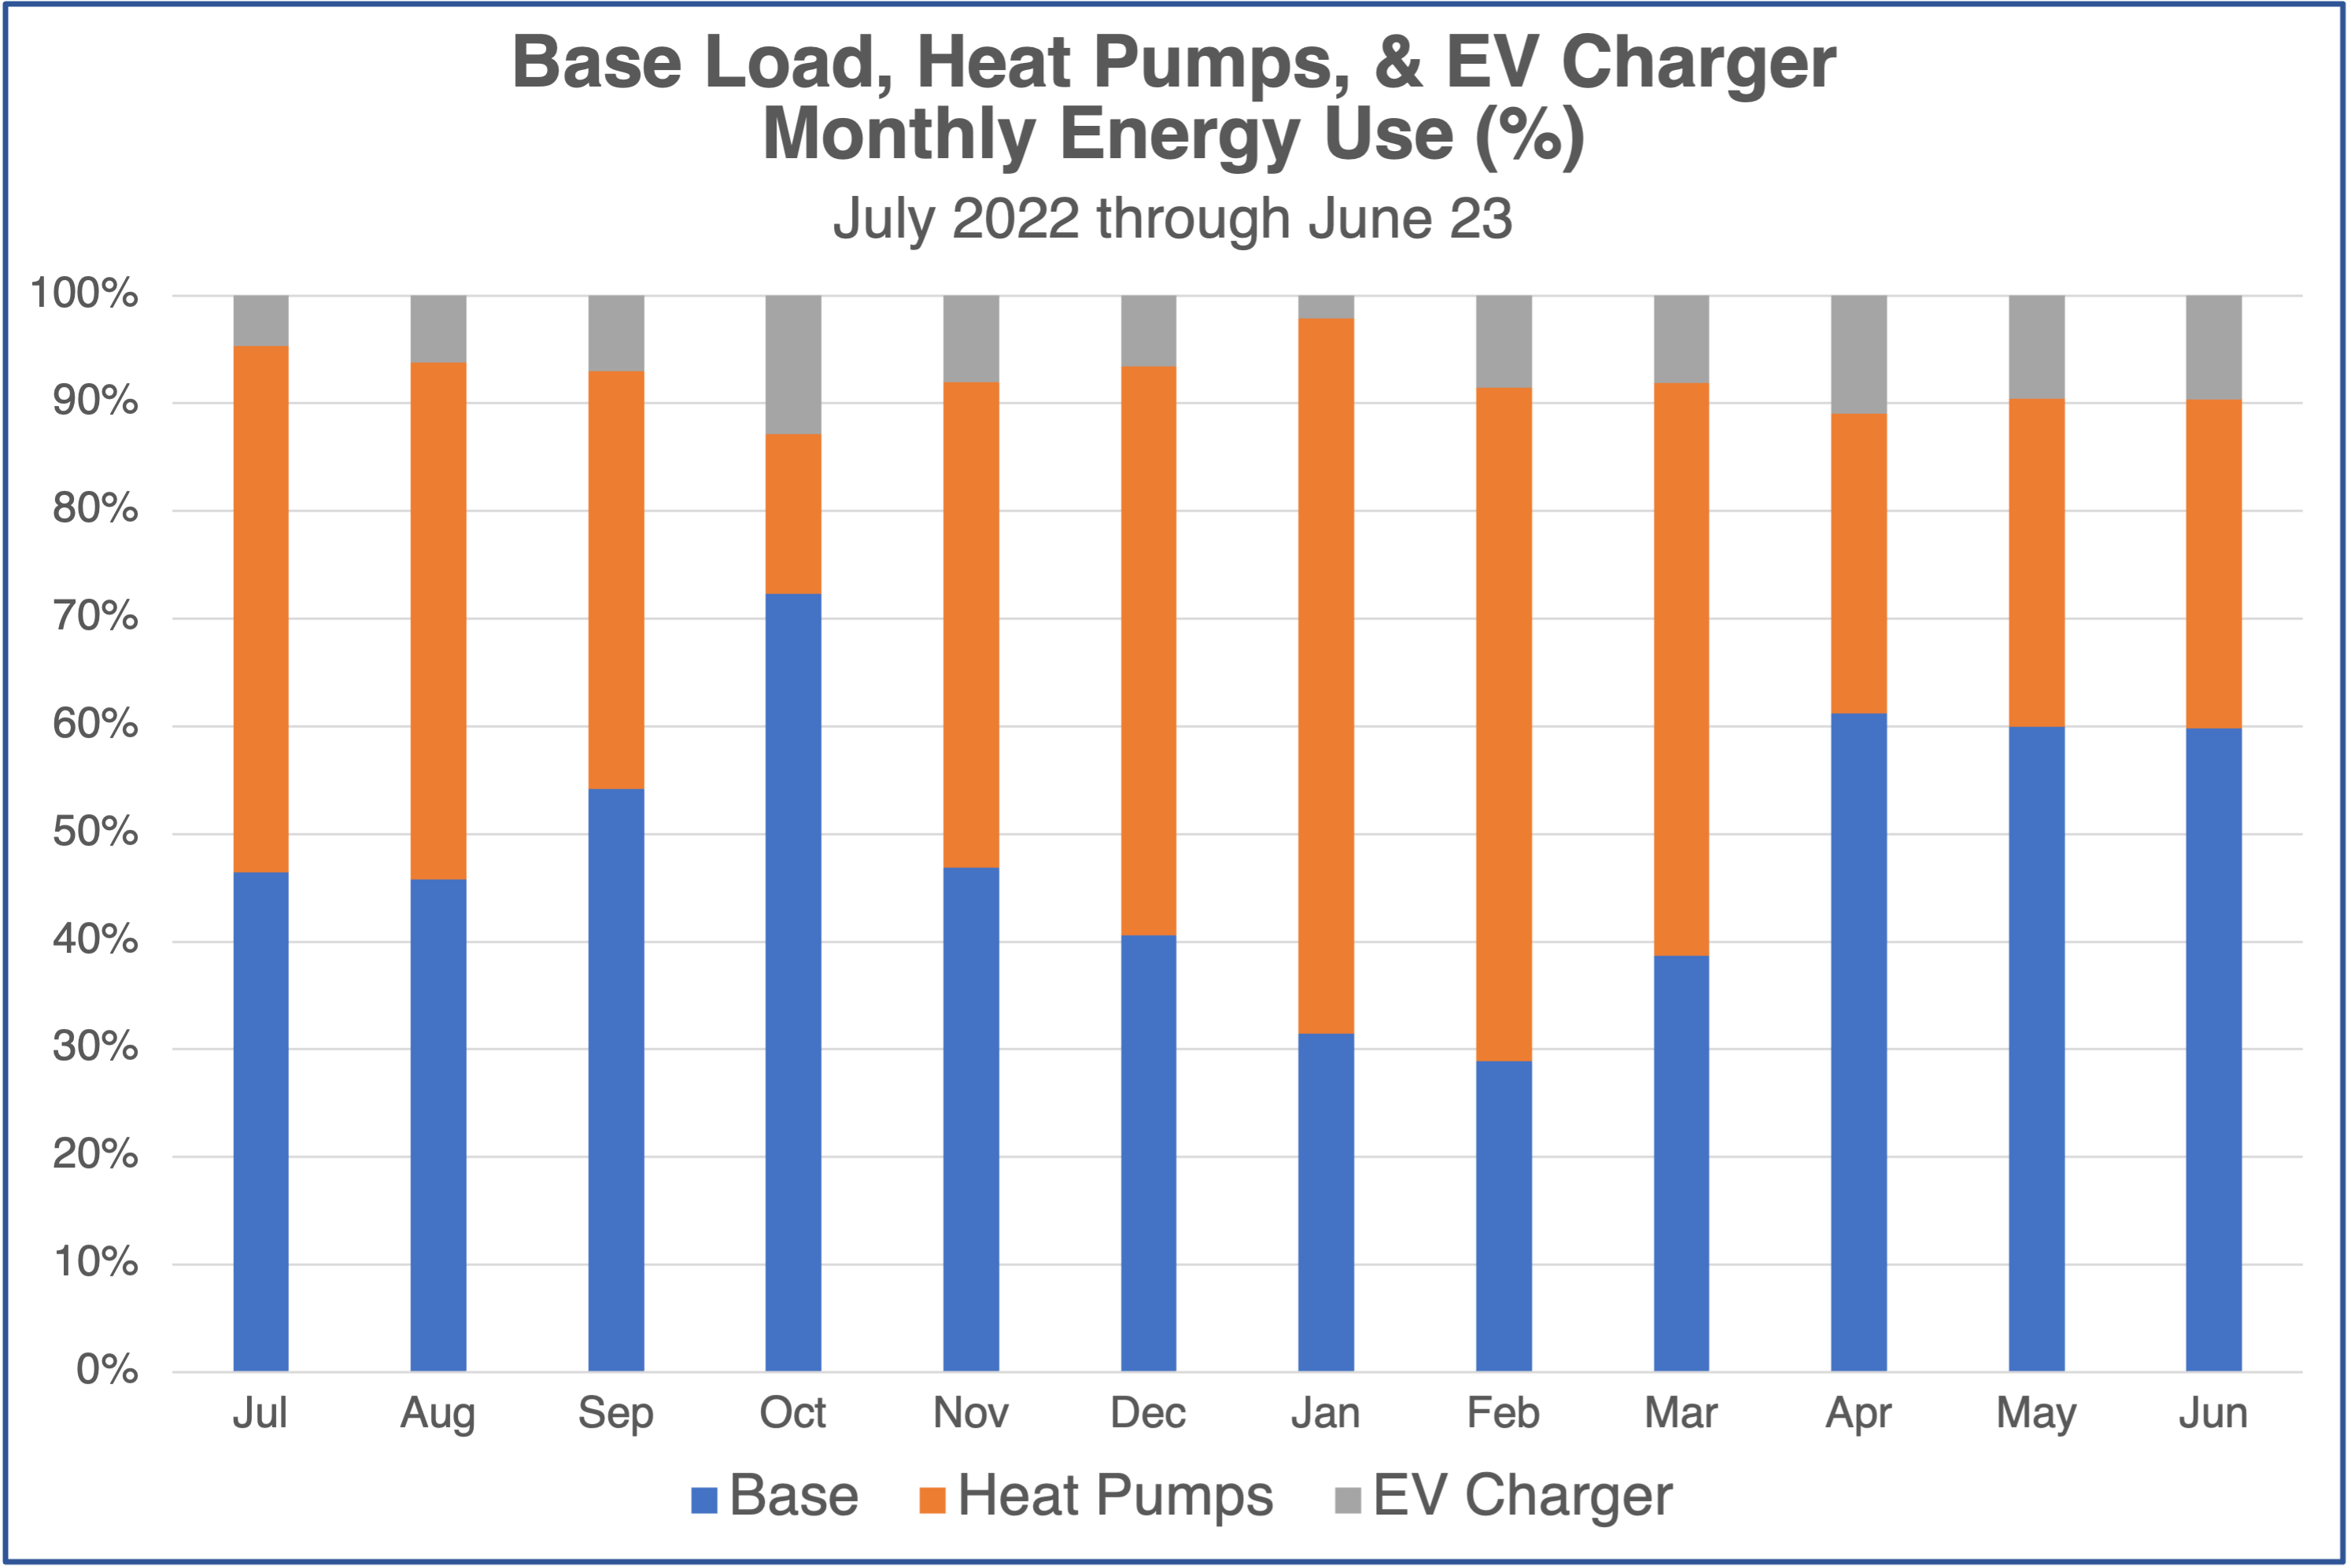 Base load, heat pumps, and EV charger electricity use by percentage